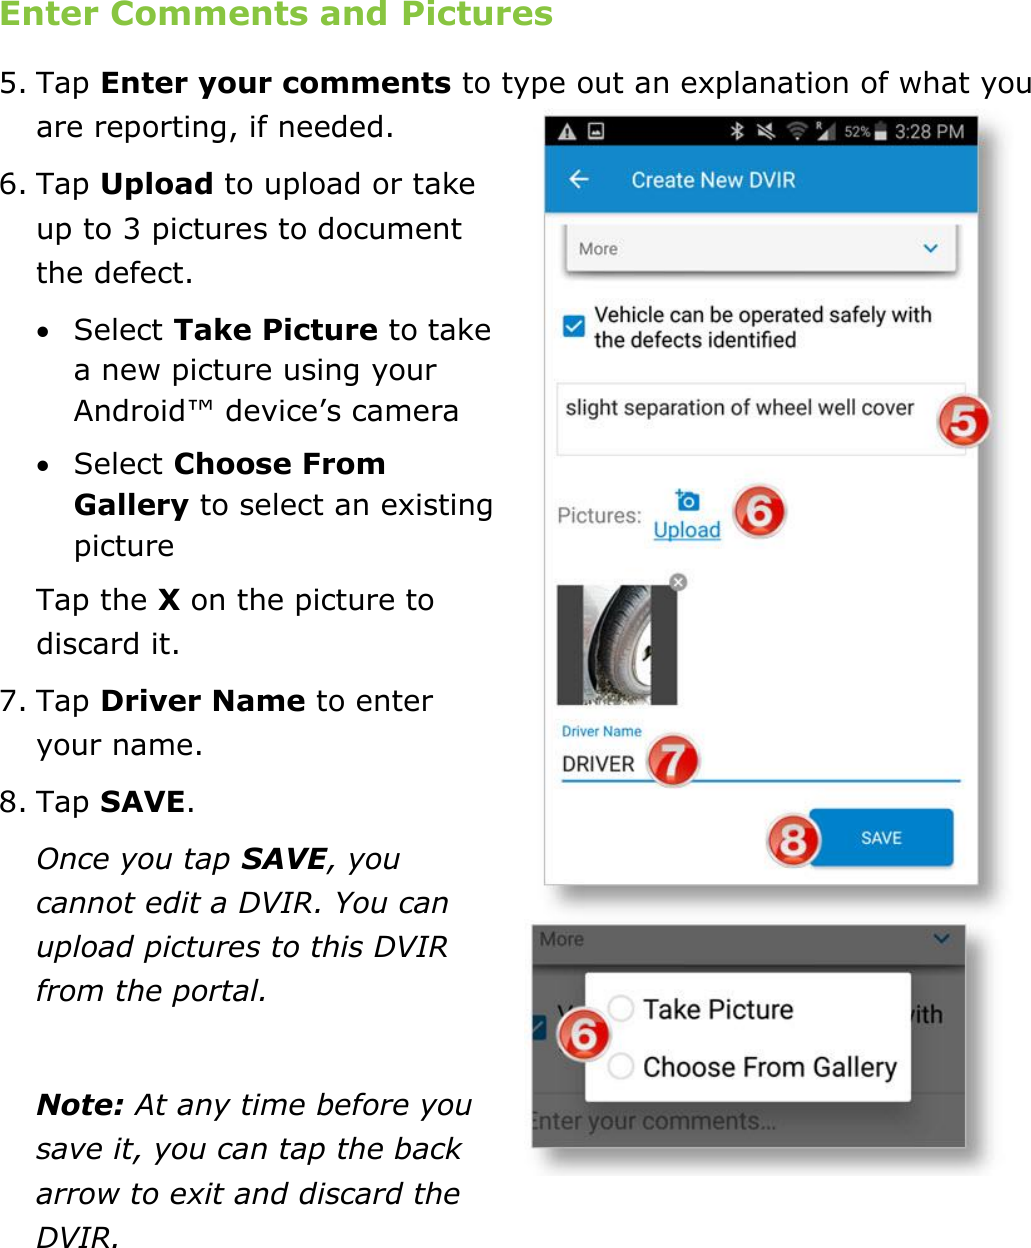 Complete a DVIR DriverConnect User Guide  57 © 2016-2017, Rand McNally, Inc. Enter Comments and Pictures 5. Tap Enter your comments to type out an explanation of what you are reporting, if needed. 6. Tap Upload to upload or take up to 3 pictures to document the defect.  Select Take Picture to take a new picture using your Android™ device’s camera  Select Choose From Gallery to select an existing picture Tap the X on the picture to discard it. 7. Tap Driver Name to enter your name. 8. Tap SAVE. Once you tap SAVE, you cannot edit a DVIR. You can upload pictures to this DVIR from the portal.   Note: At any time before you save it, you can tap the back arrow to exit and discard the DVIR.    